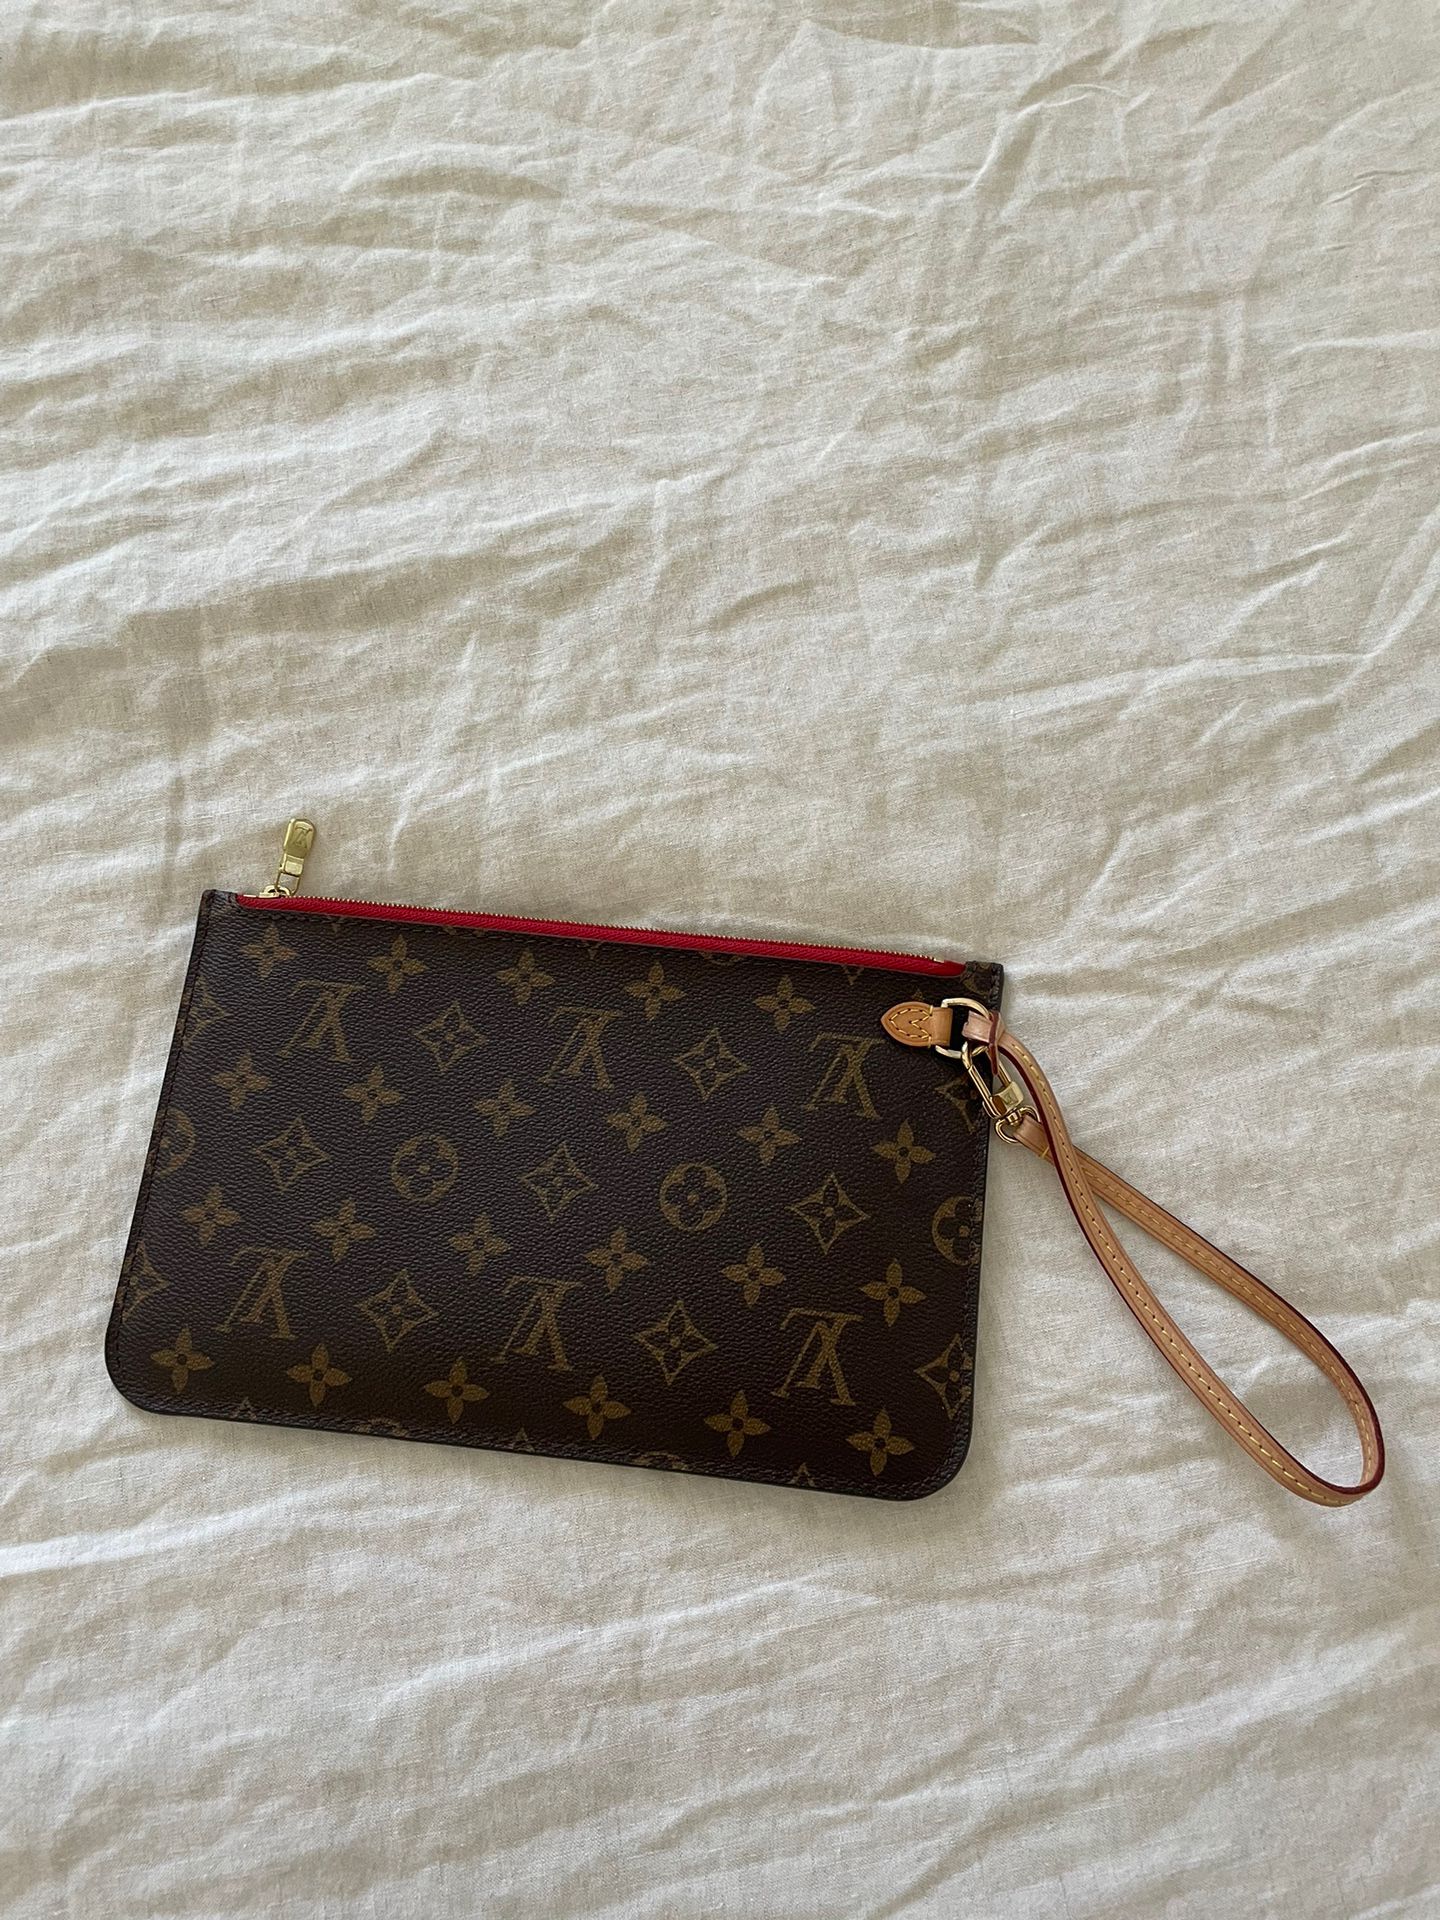 Louis Vuitton Neverfull Mm Bag for Sale in Orland Hills, IL - OfferUp